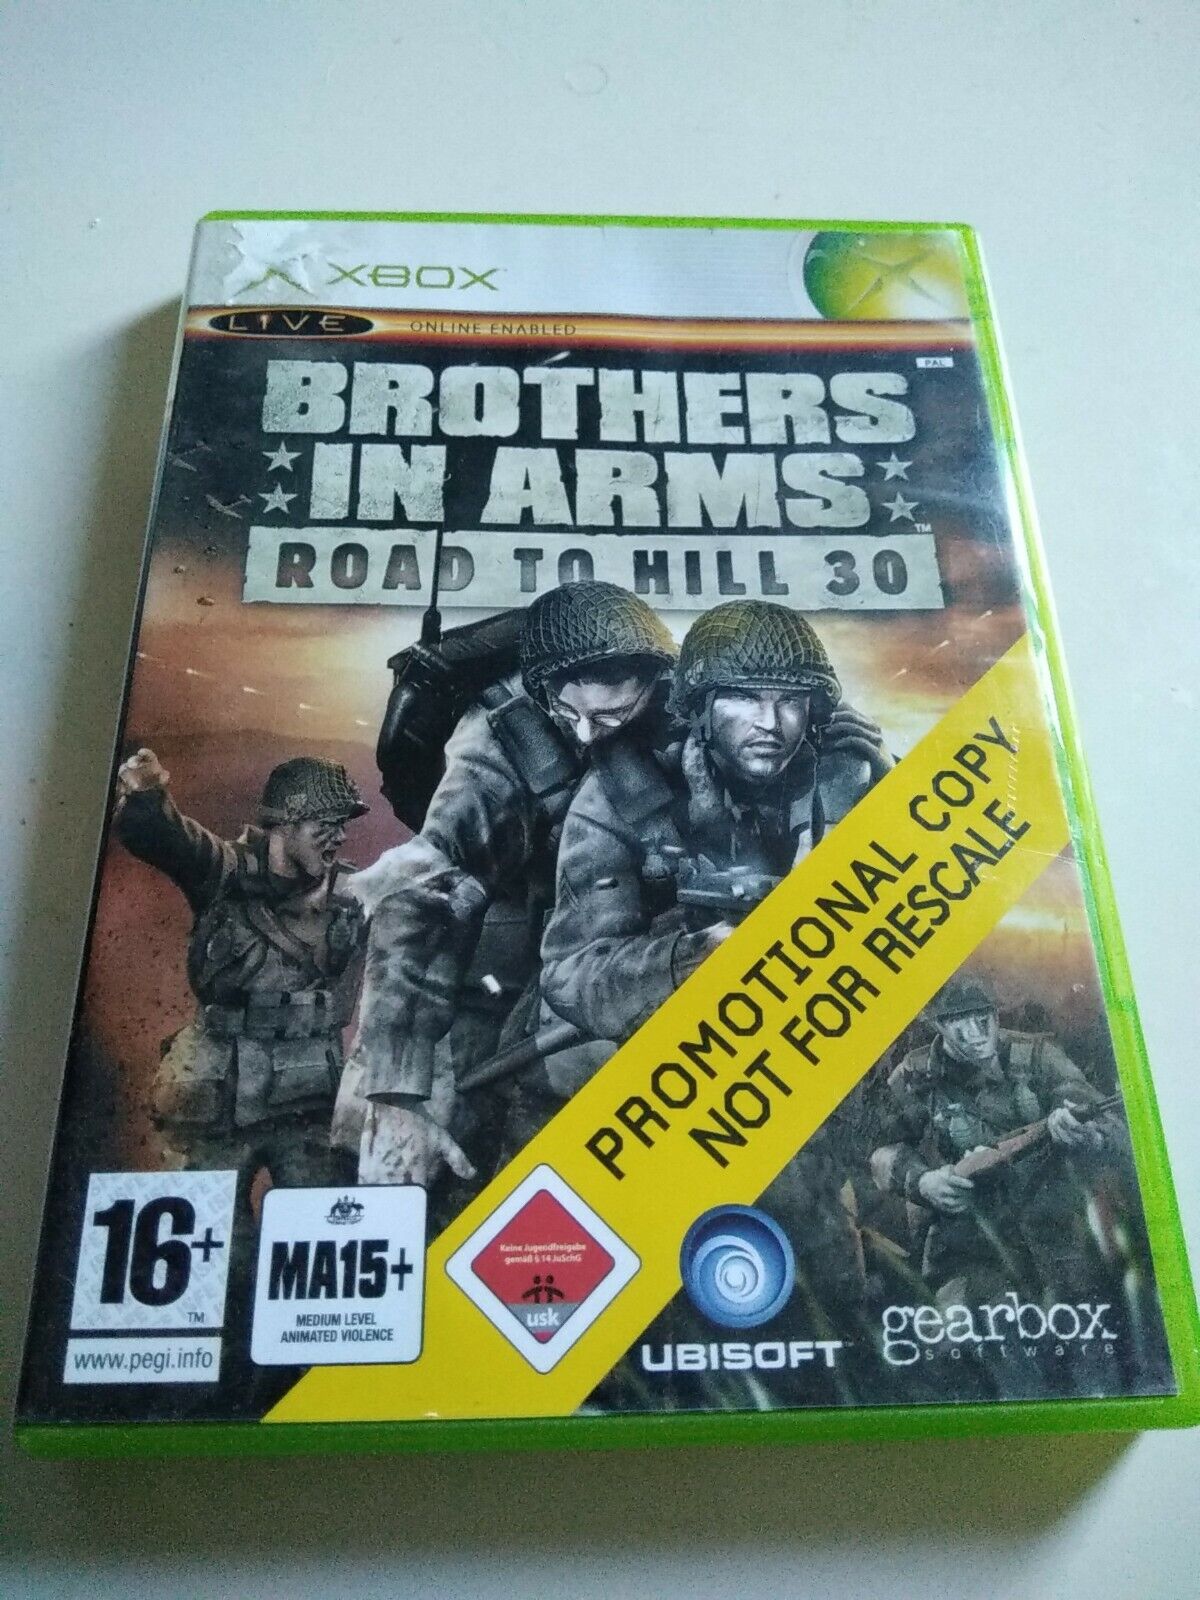 Brothers in Arms Road to Hill 30  Xbox - promotion rare 